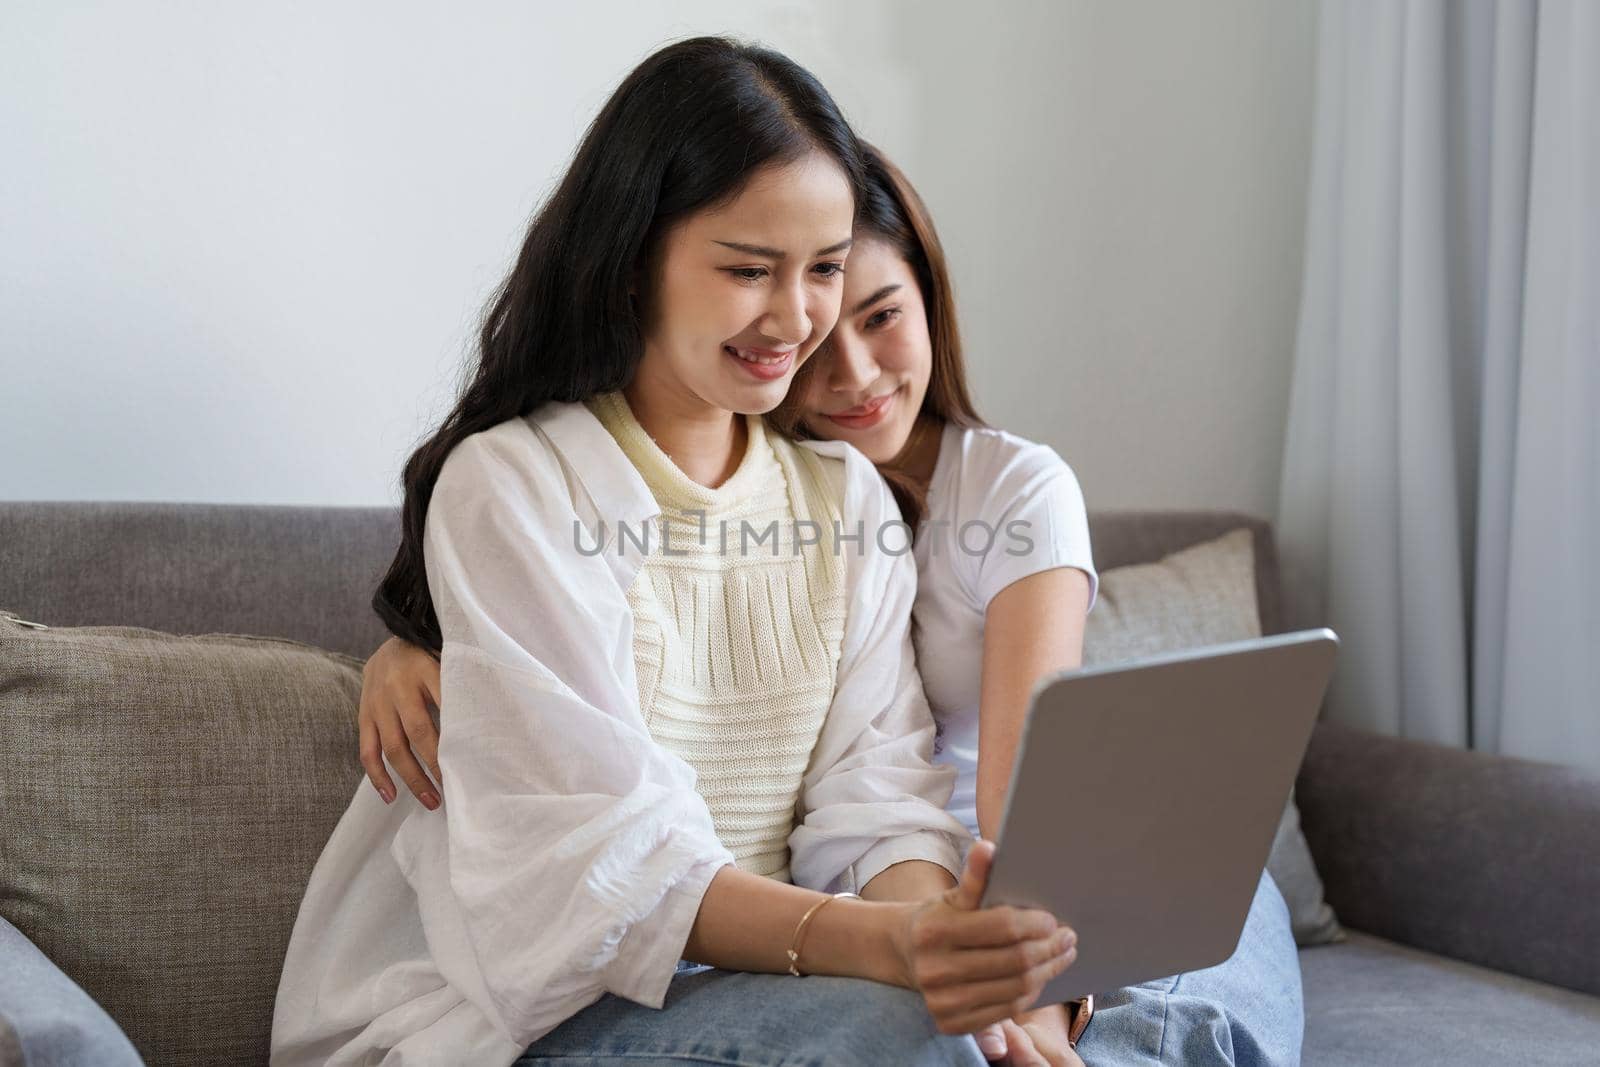 lgbtq, lgbt concept, homosexuality, portrait of two asian women enjoying together and showing love for each other while using tablet by Manastrong